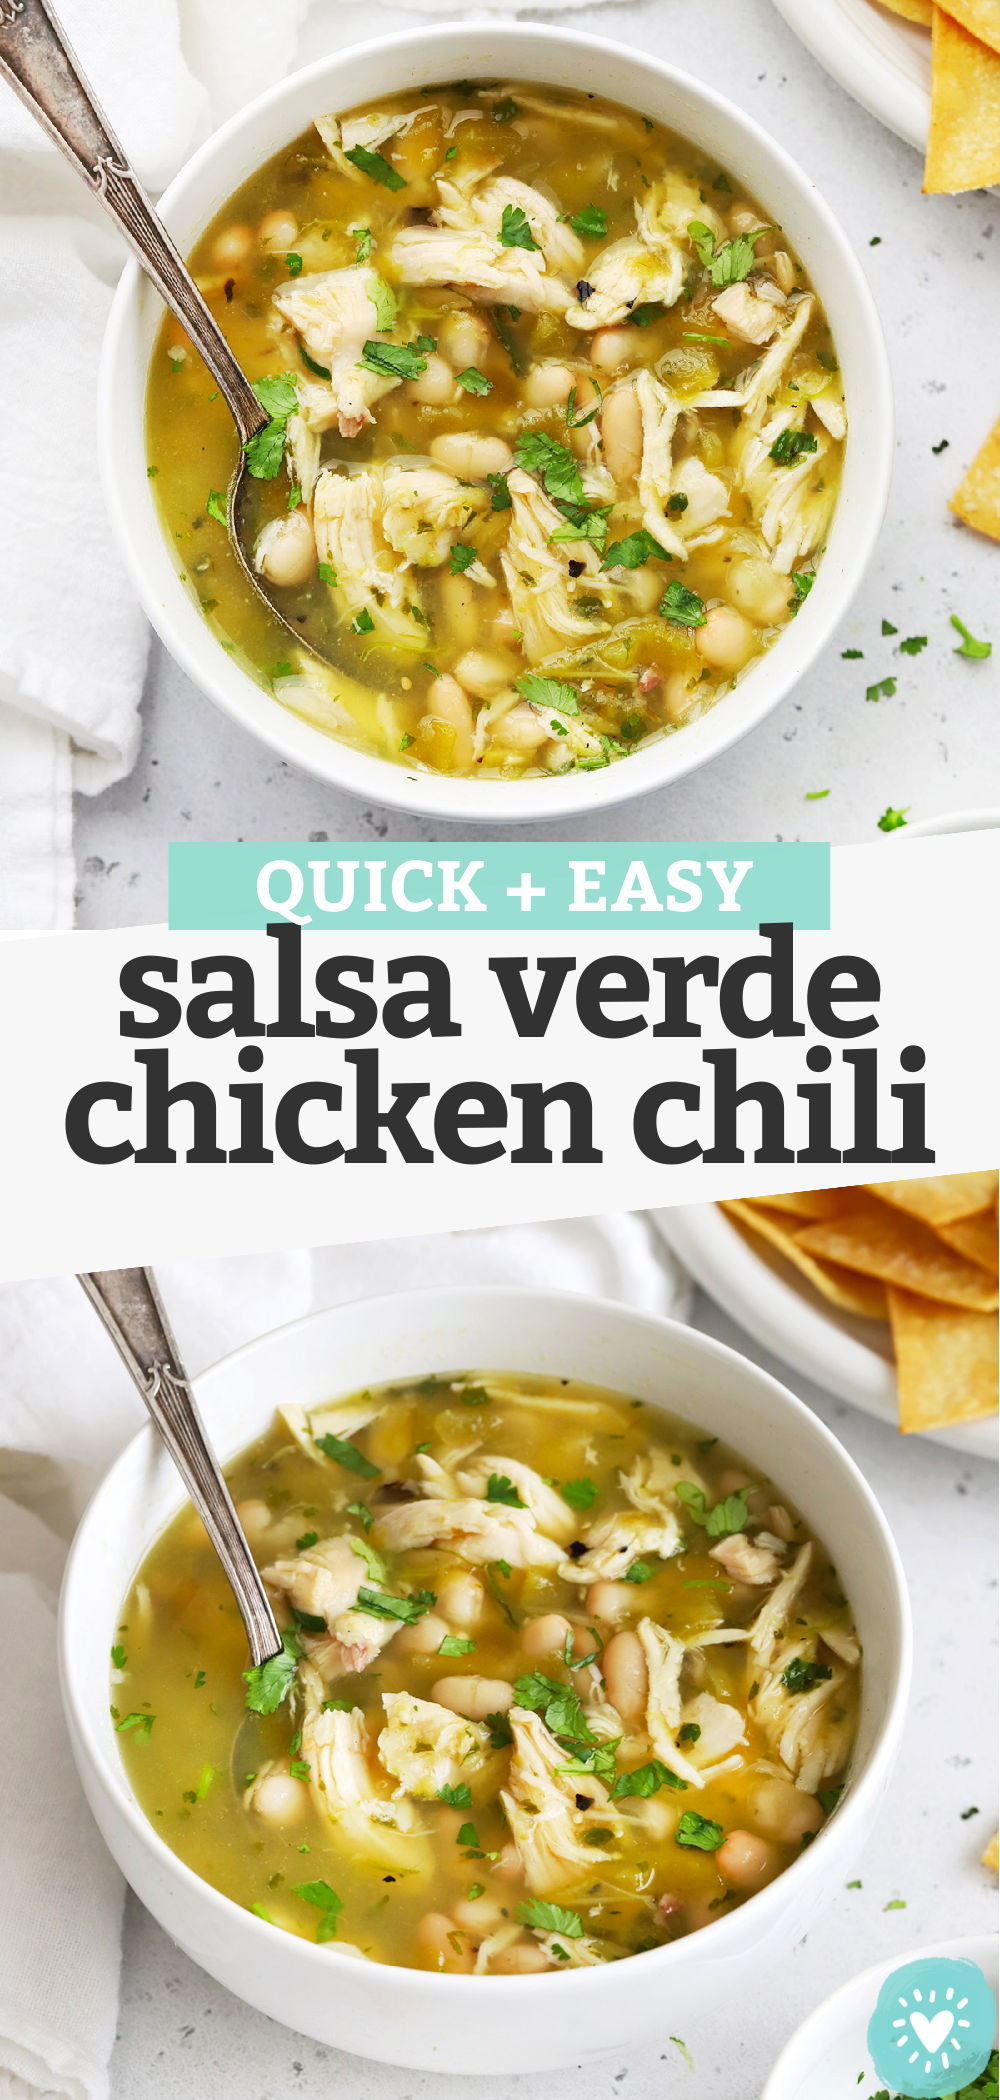 Salsa Verde Chicken Chili - This might be the EASIEST chili recipe ever! Just 7 ingredients + 15 minutes and you're ready to enjoy this lighter take on chili night. (Gluten-Free + Easy!) // White Chicken Chili // Healthy Chili Recipe // Chicken Chili Recipe // Healthy Soup #chili #chickenchili #whitechili #healthysoup